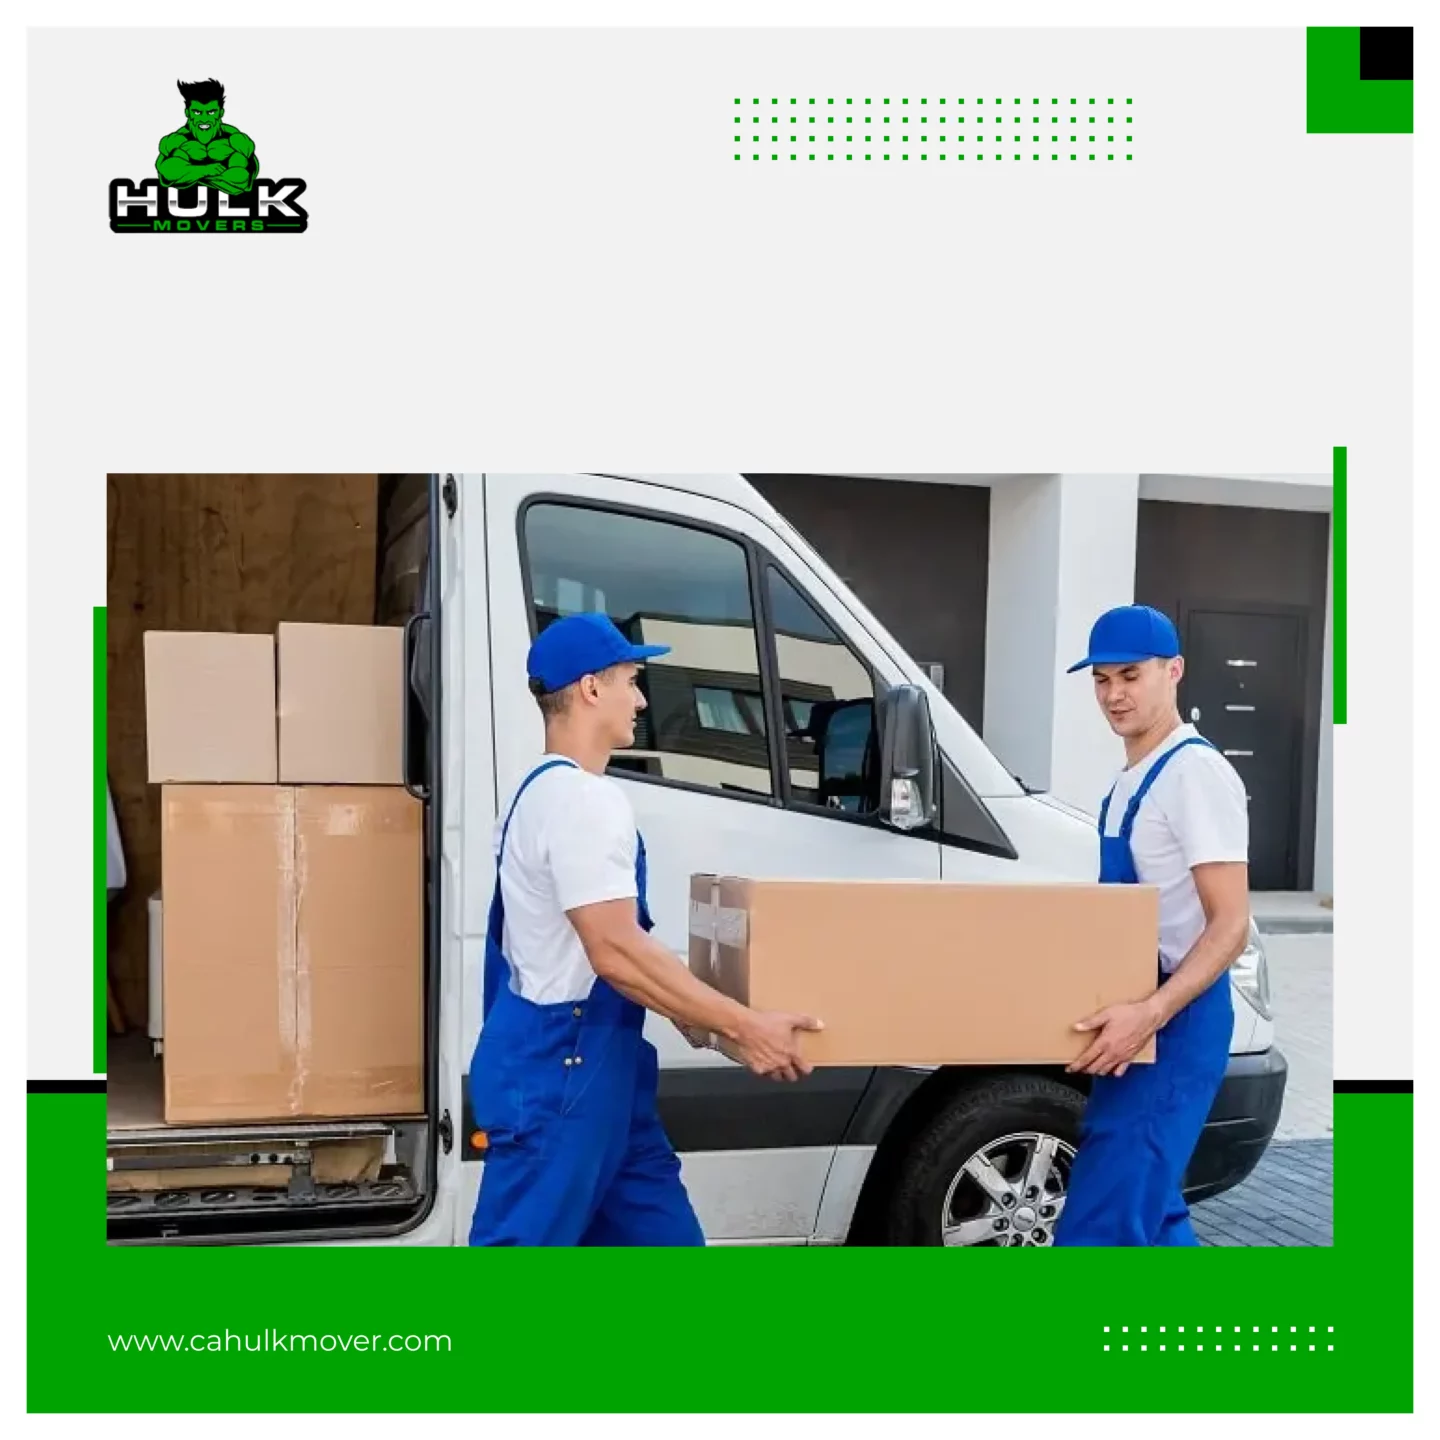 Movers Near Me: Best Rates, Reviews And Availability!